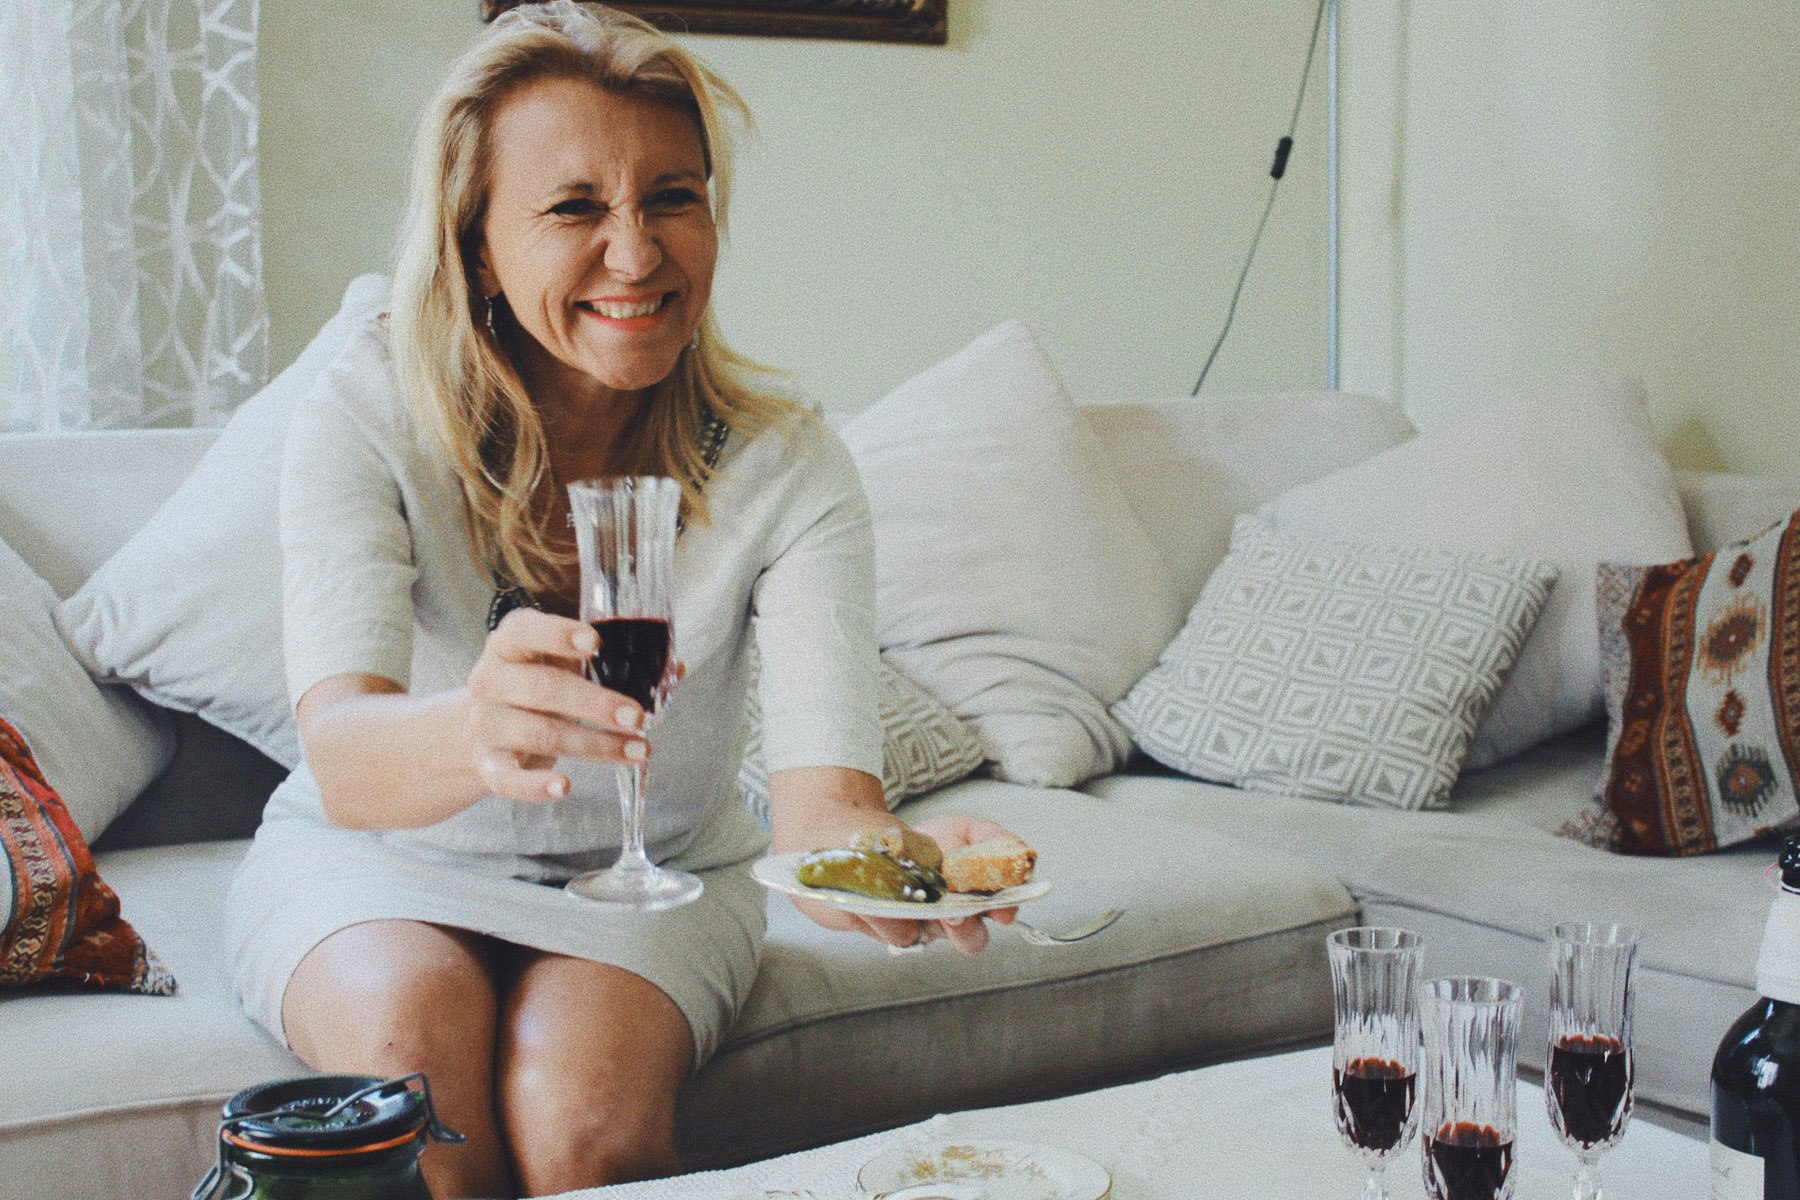 Woman drinking a glass of red wine offering a dish to someone off-camera.jpg